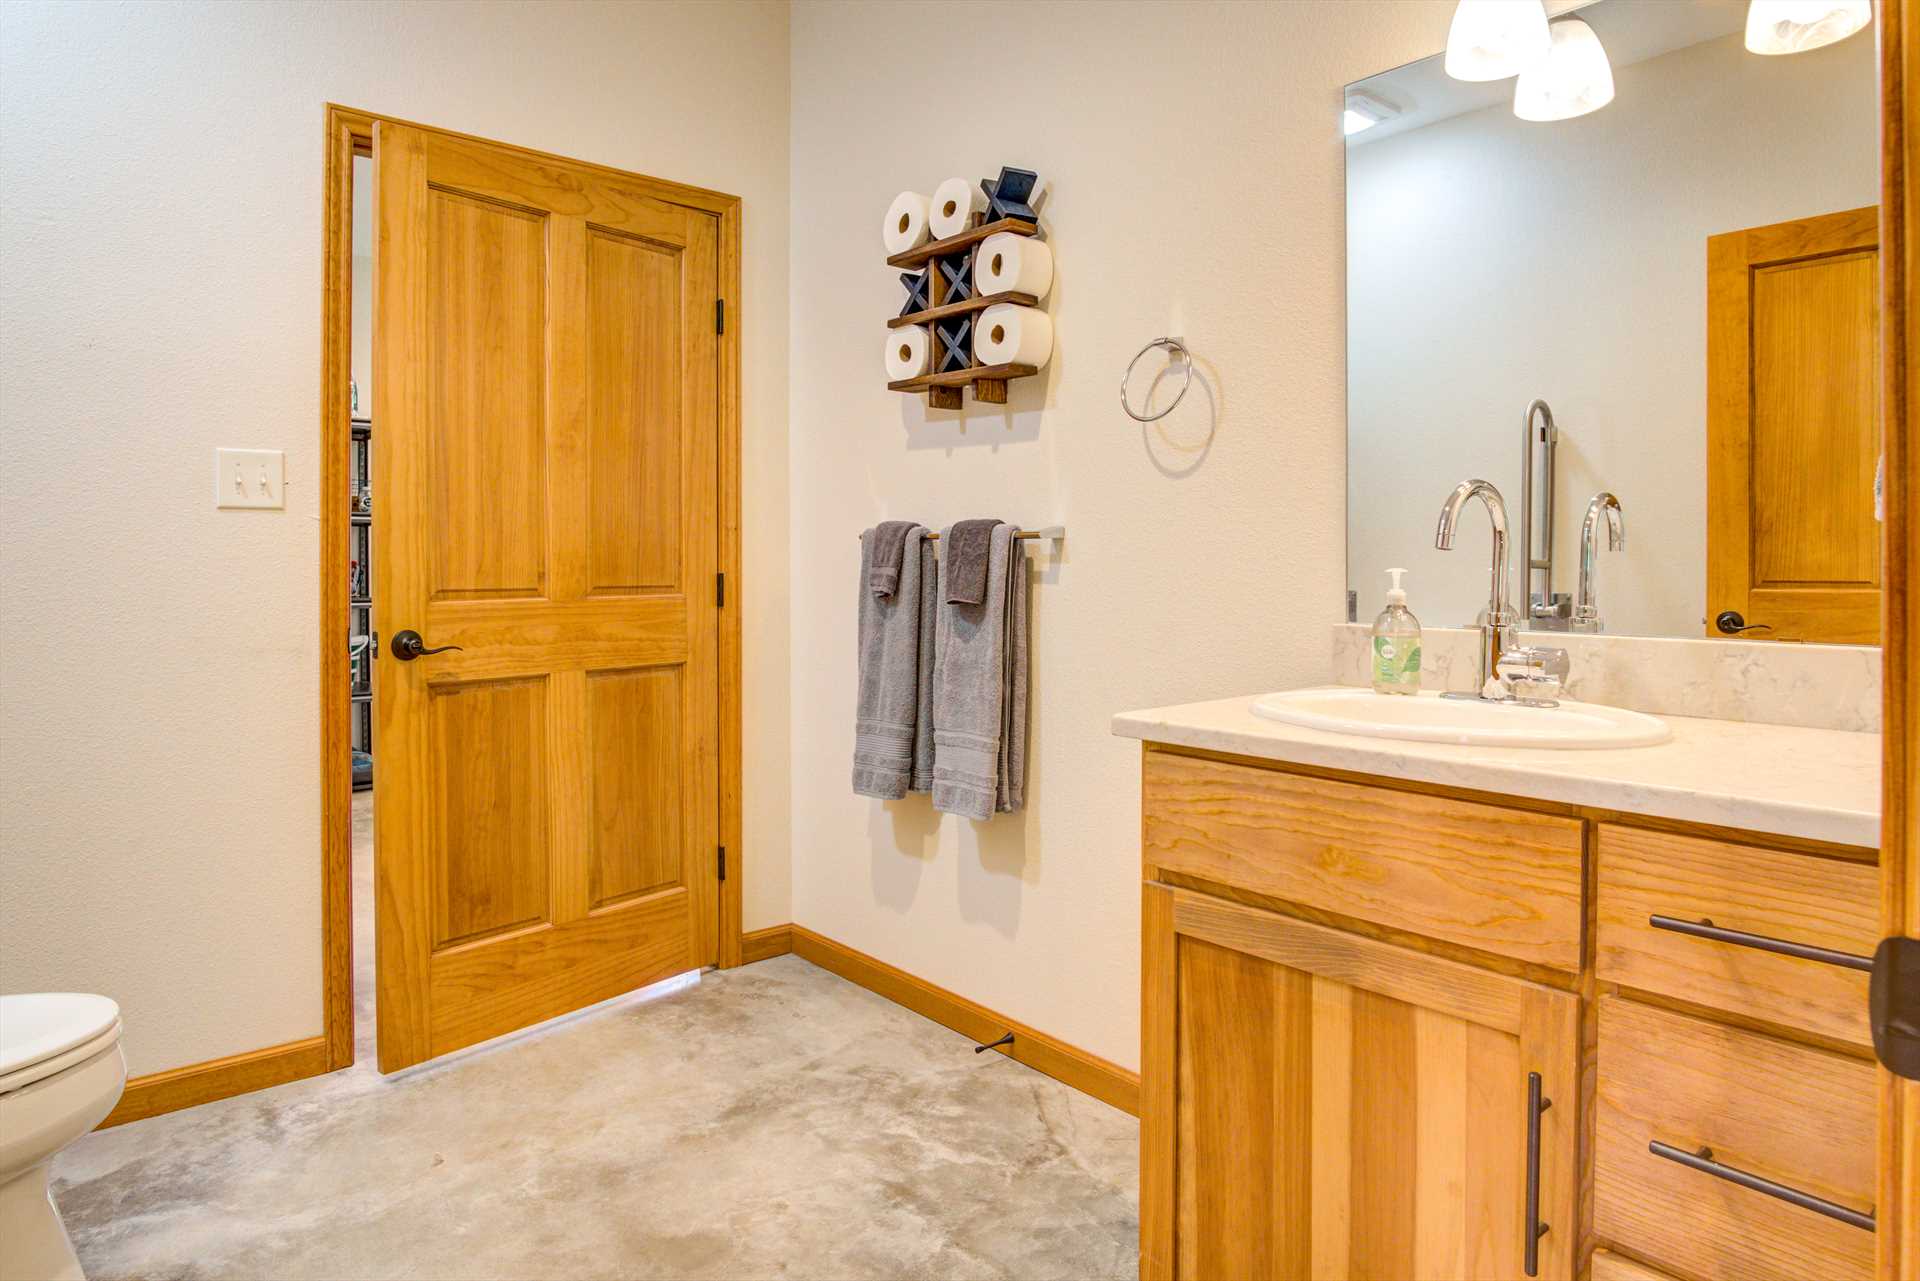                                                 An additional half-bath is located close to the kitchen, dining, and living room areas for your convenience.